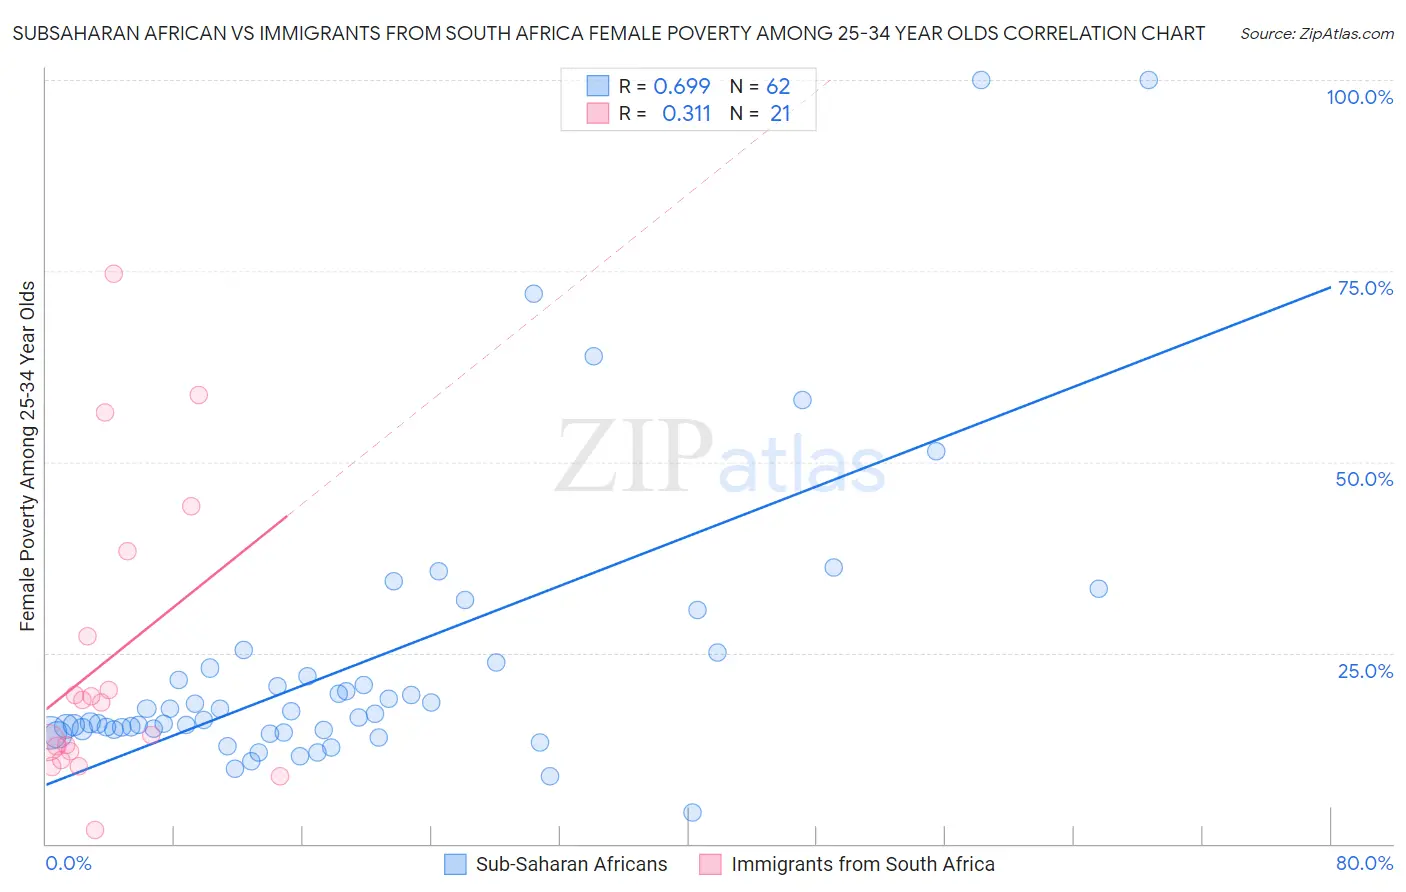 Subsaharan African vs Immigrants from South Africa Female Poverty Among 25-34 Year Olds